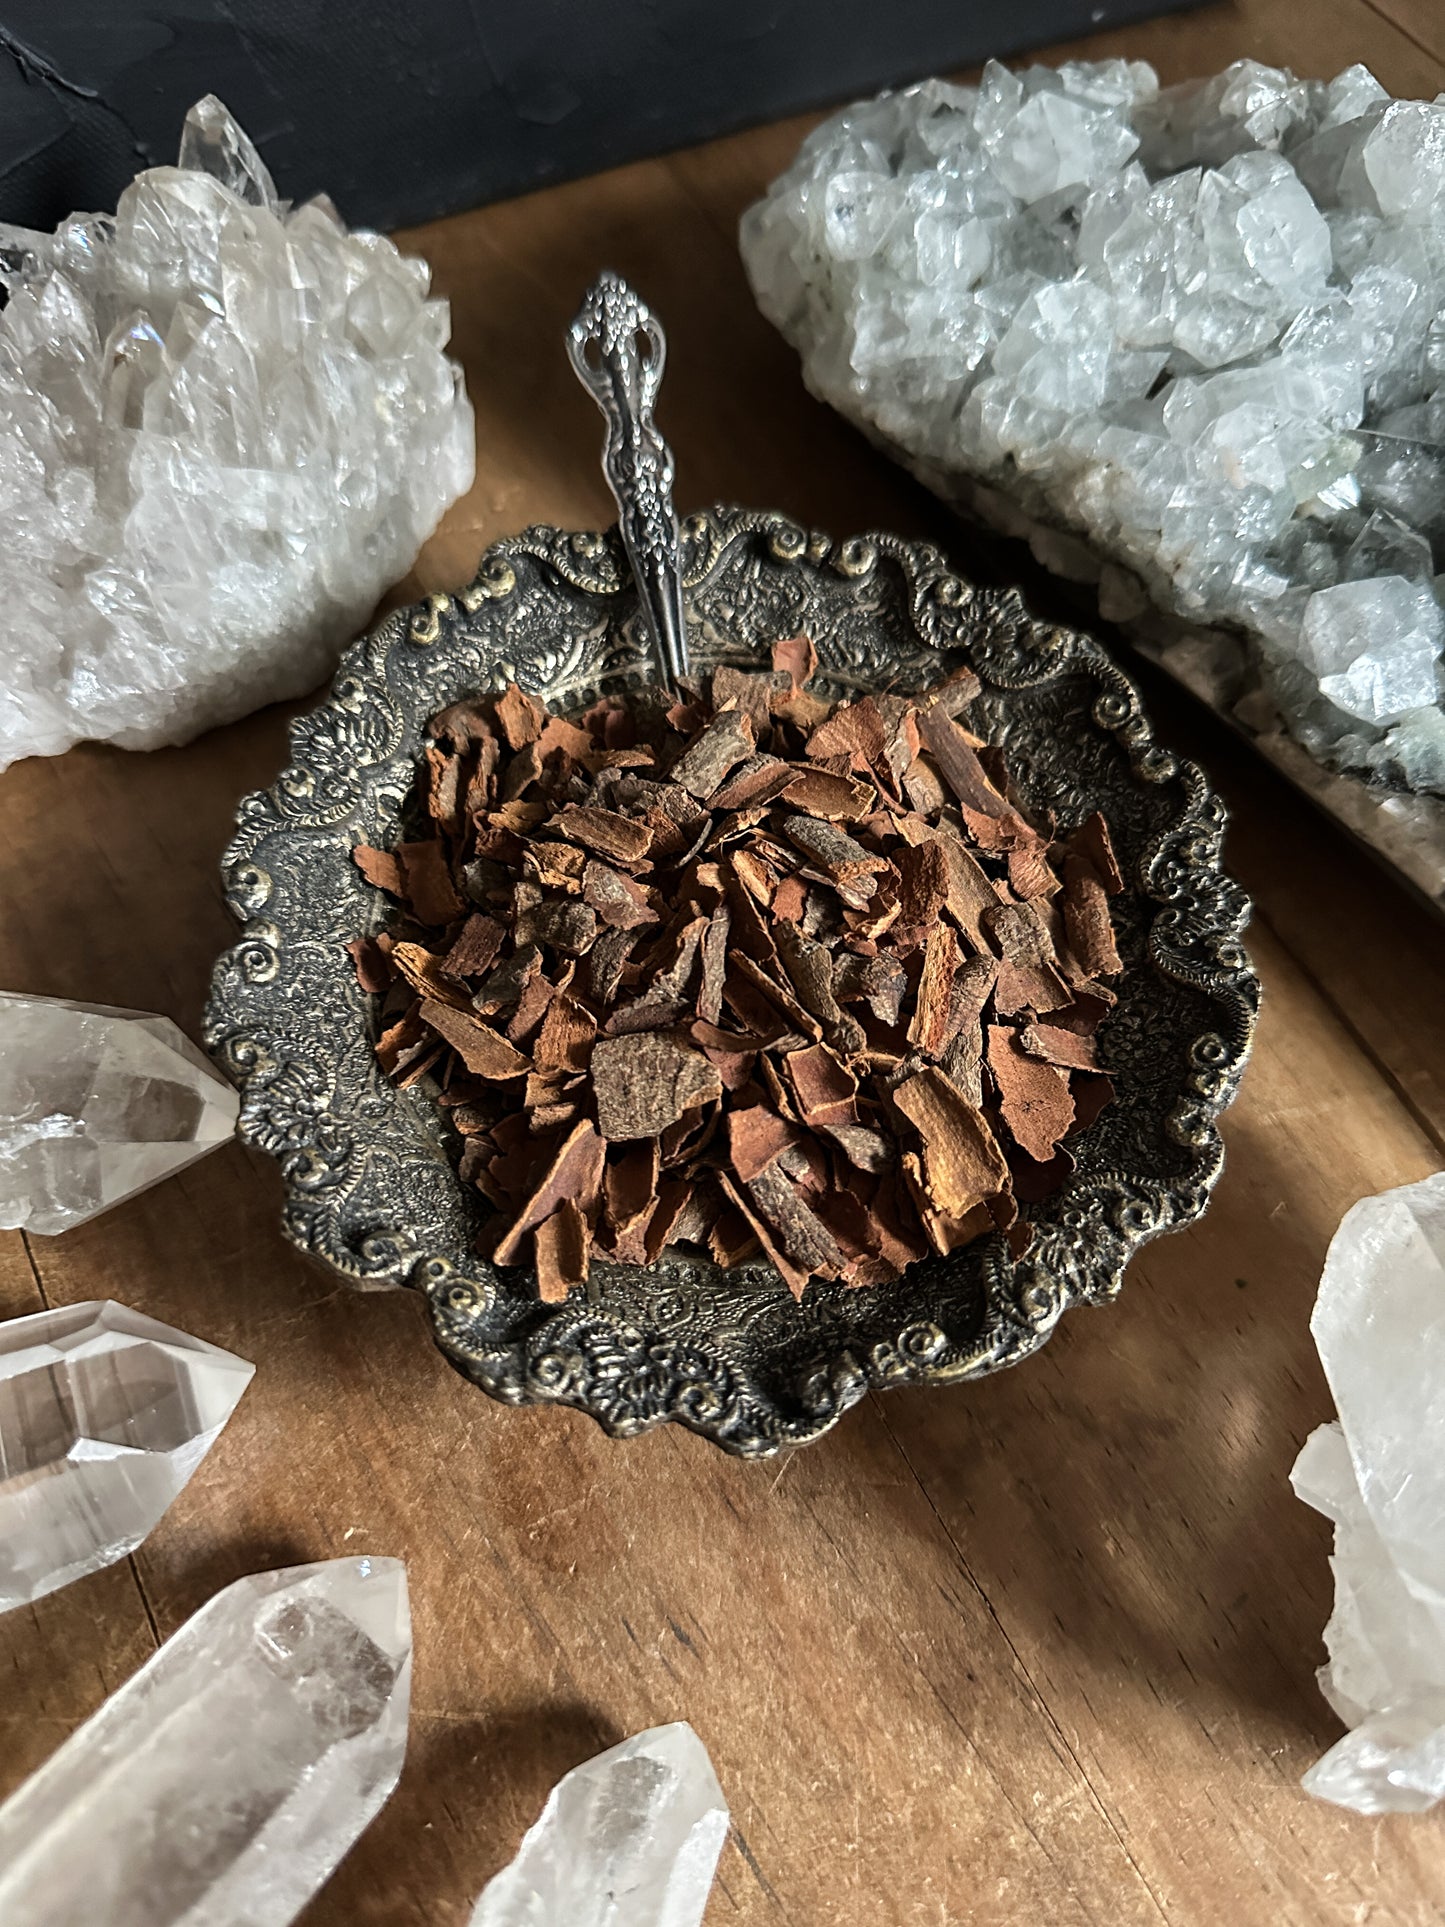 Magickal Dried Herbs and spices for all your witchy brews. Cinnamon Chips !